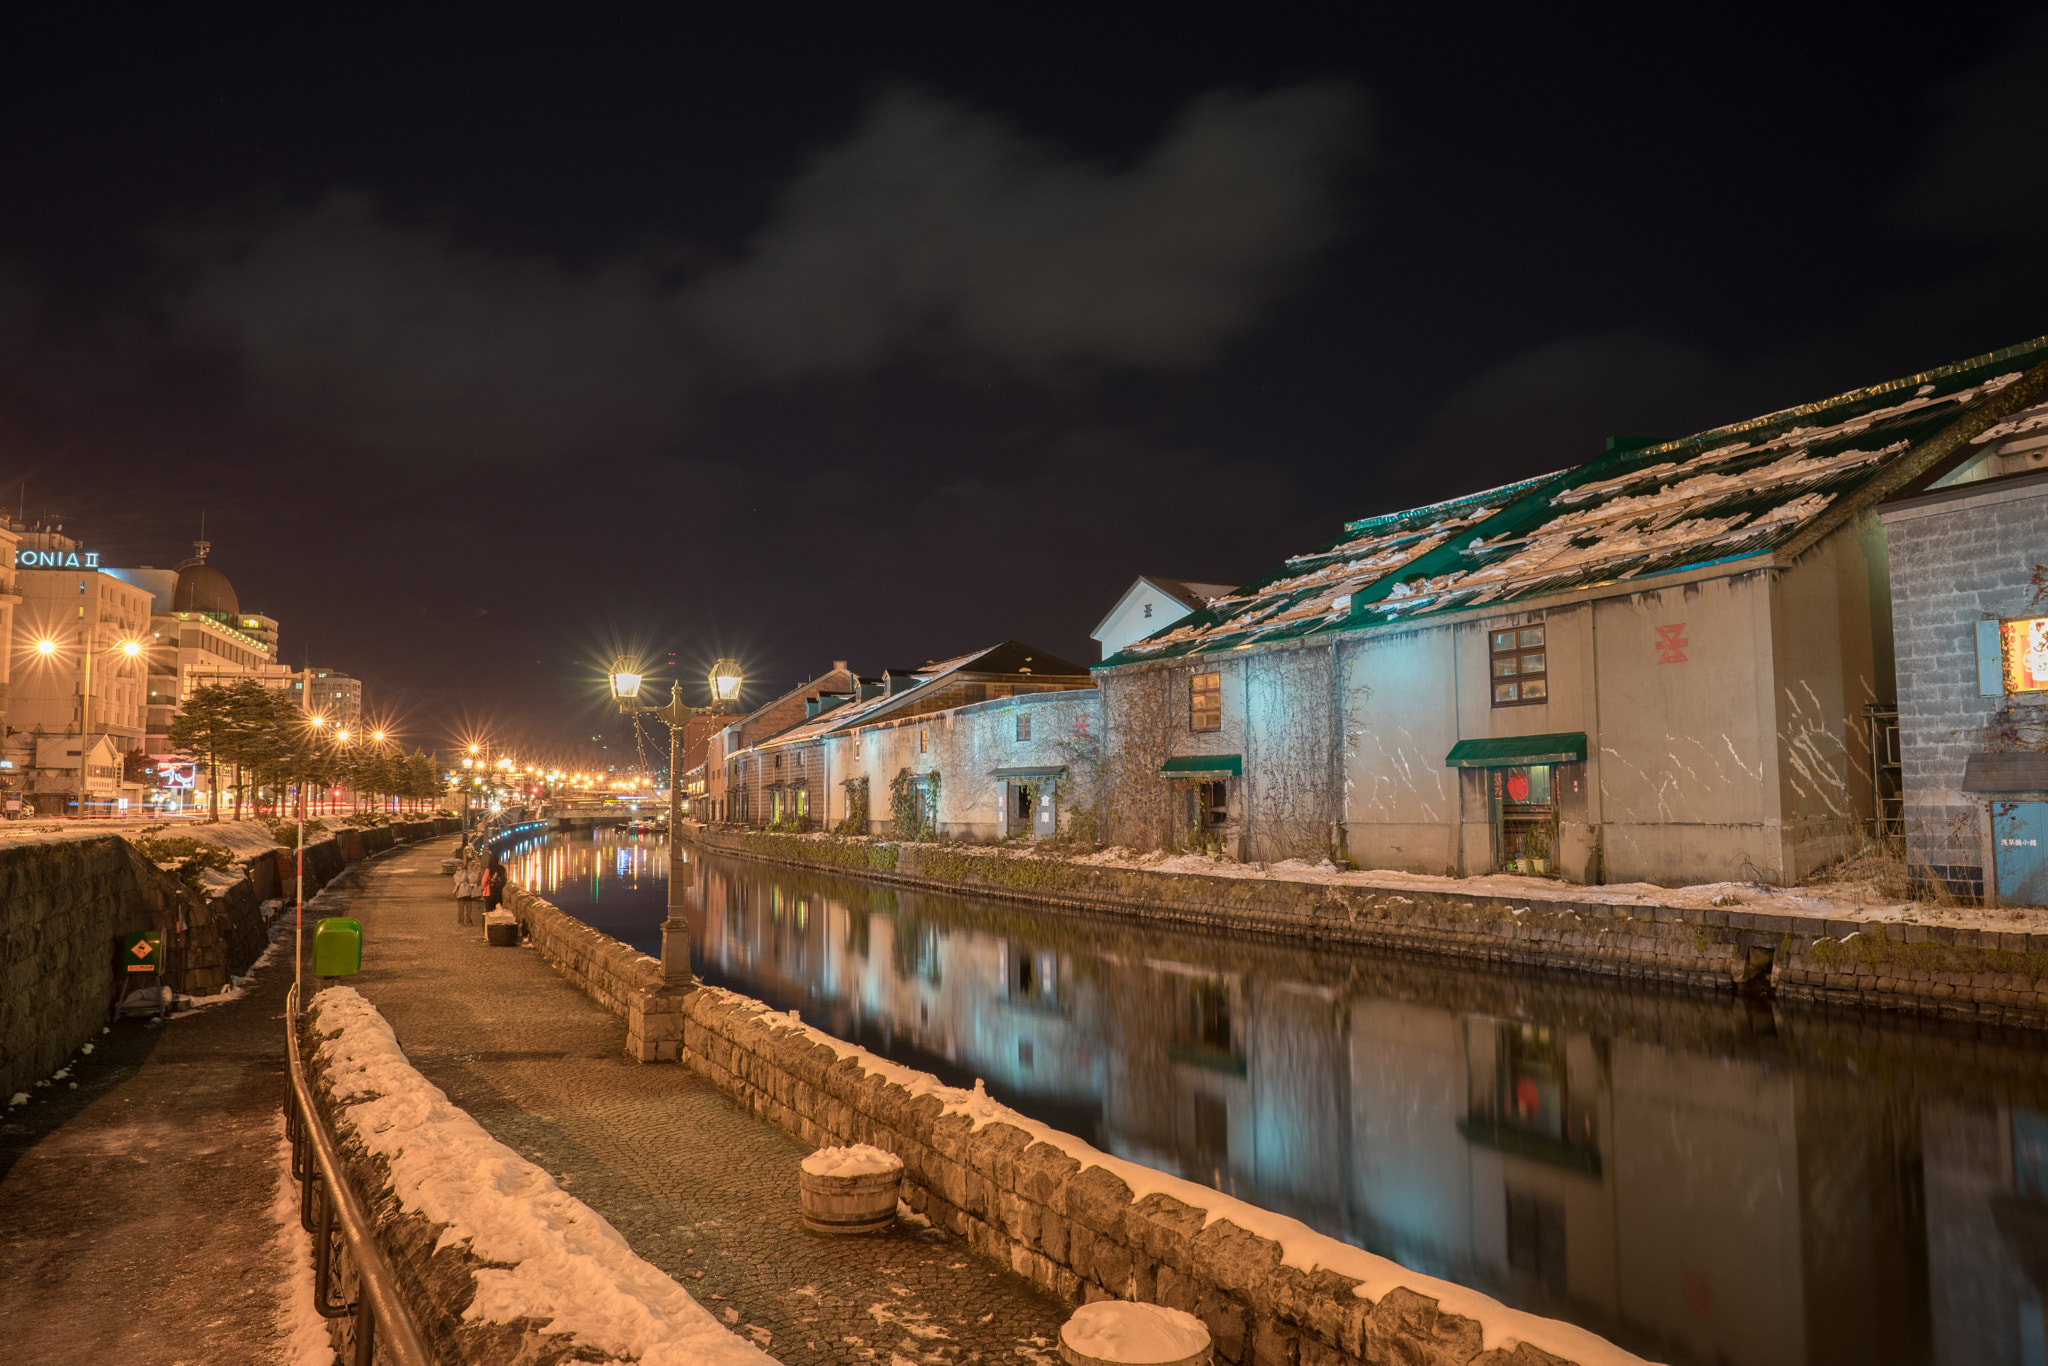 Sony a7 II sample photo. Winter canal photography